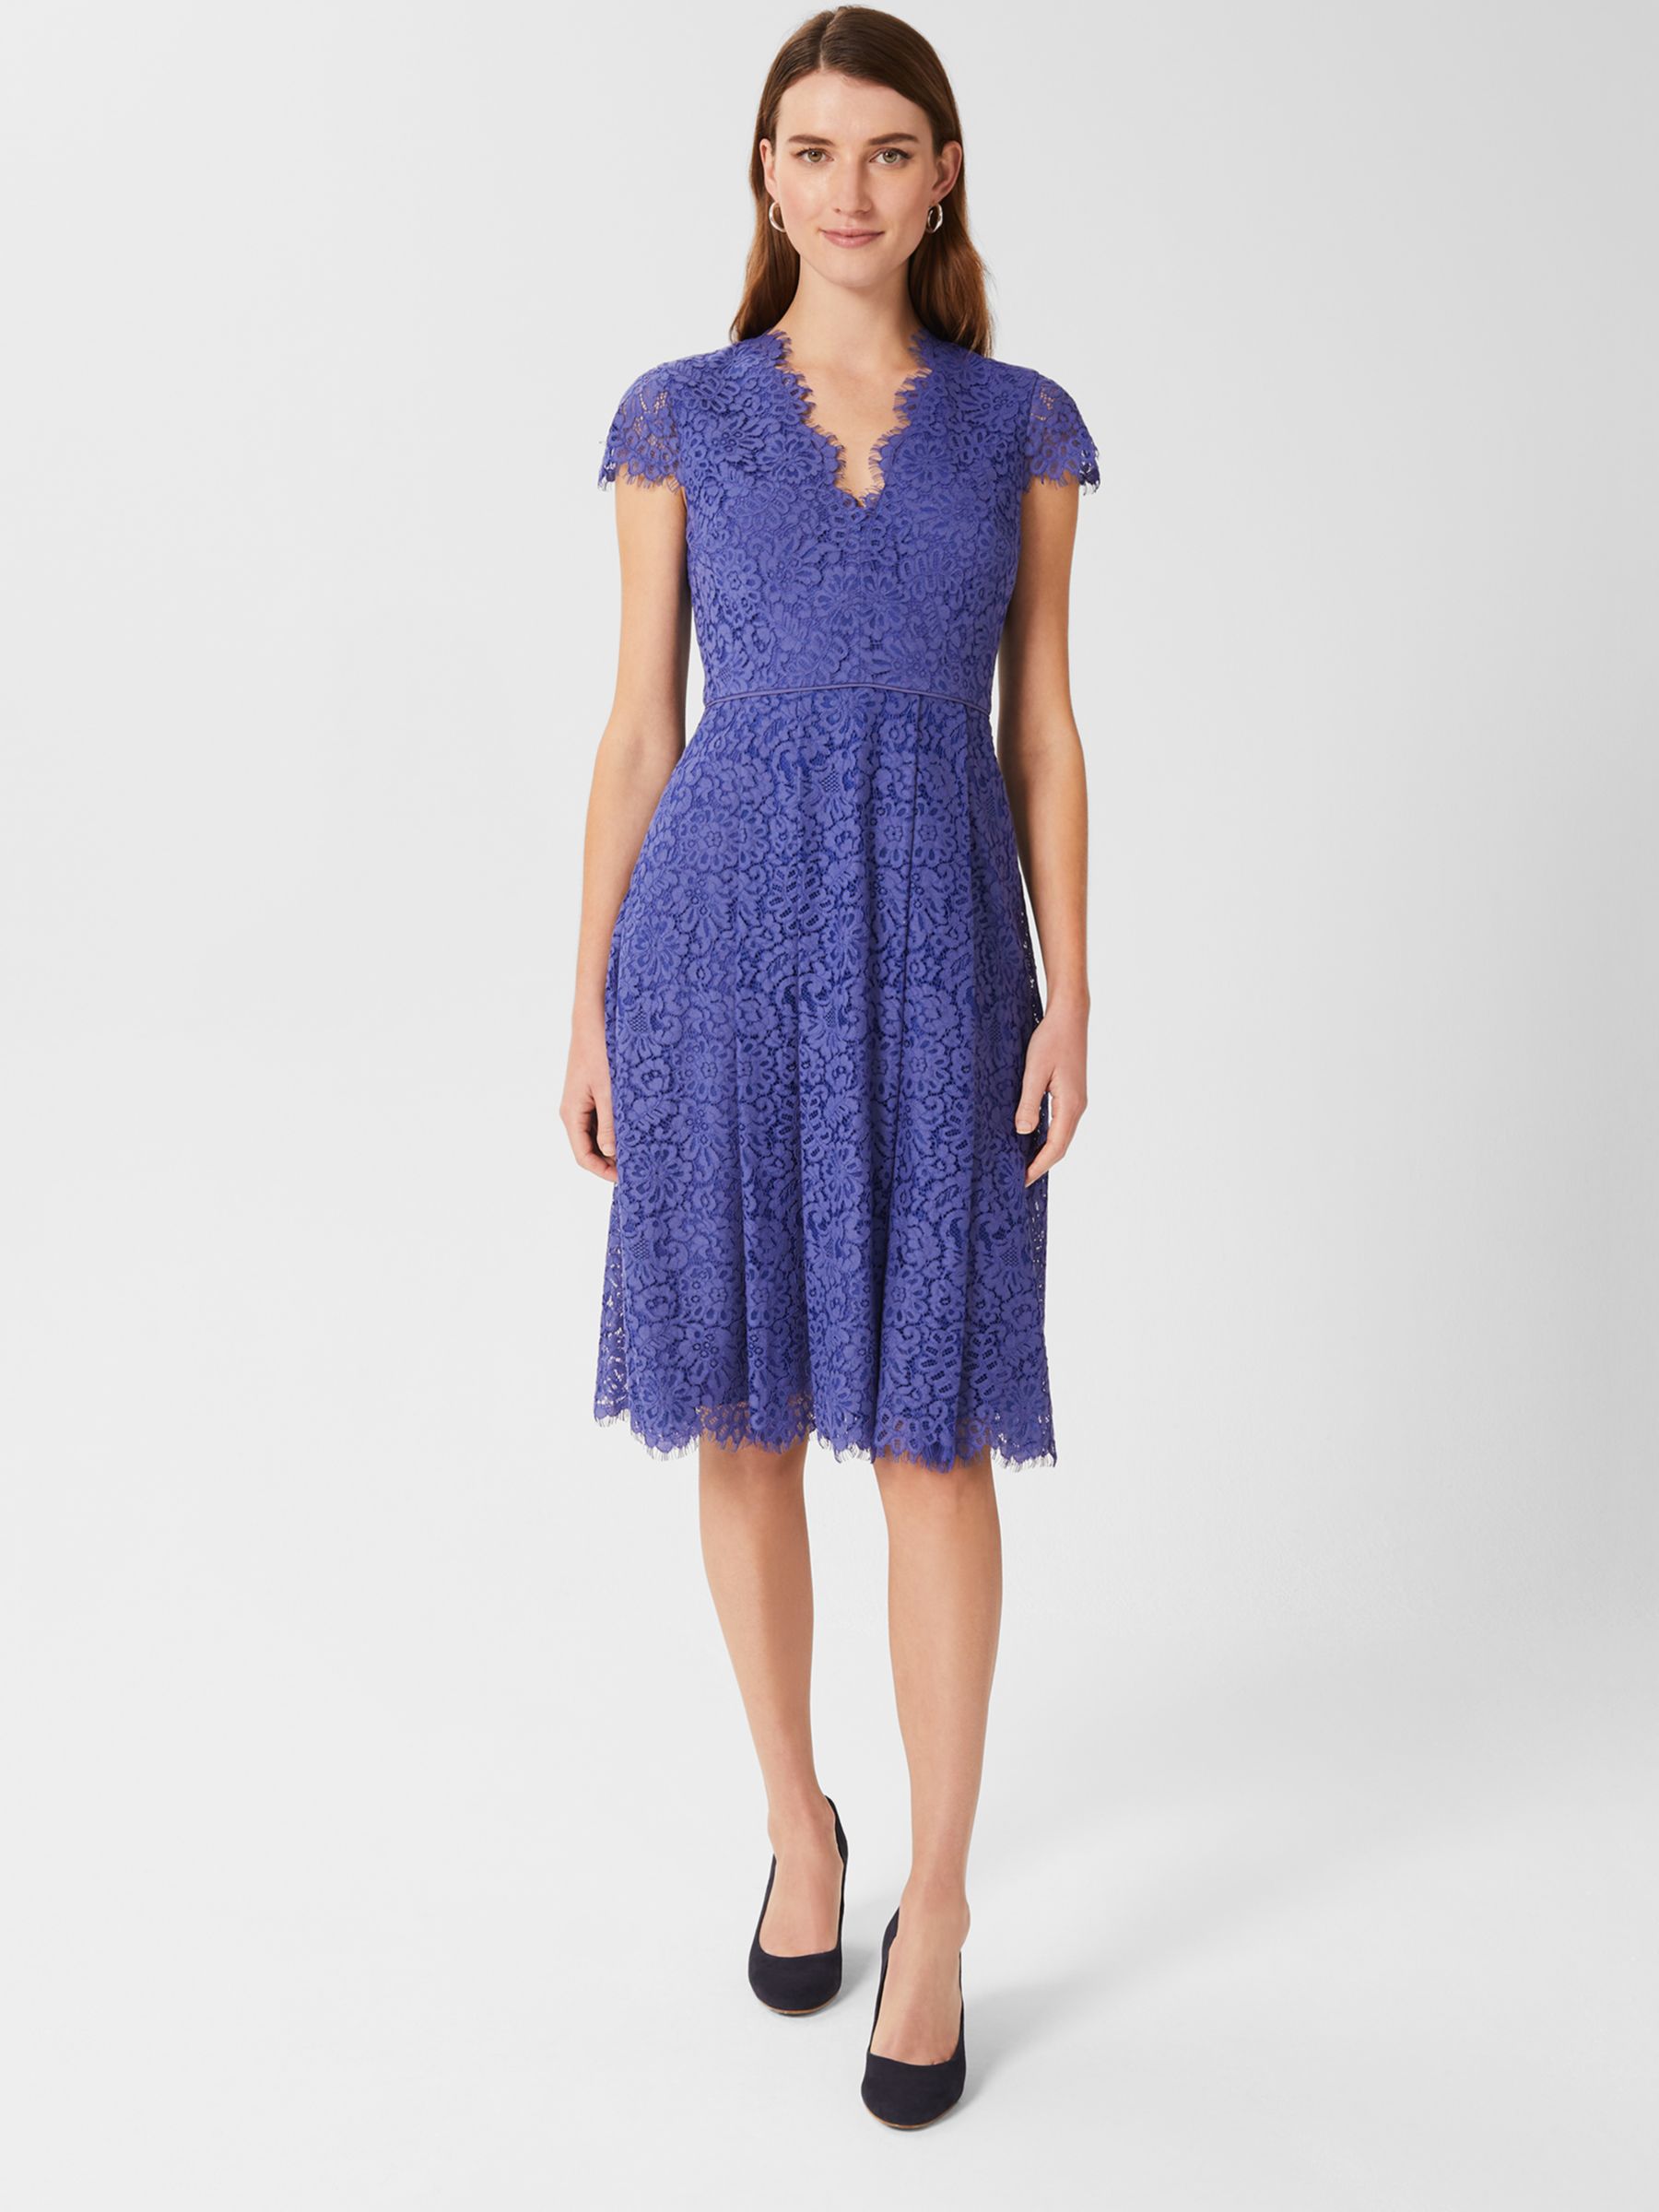 Hobbs Anastasia Fit and Flare Lace Dress, Blue, 10